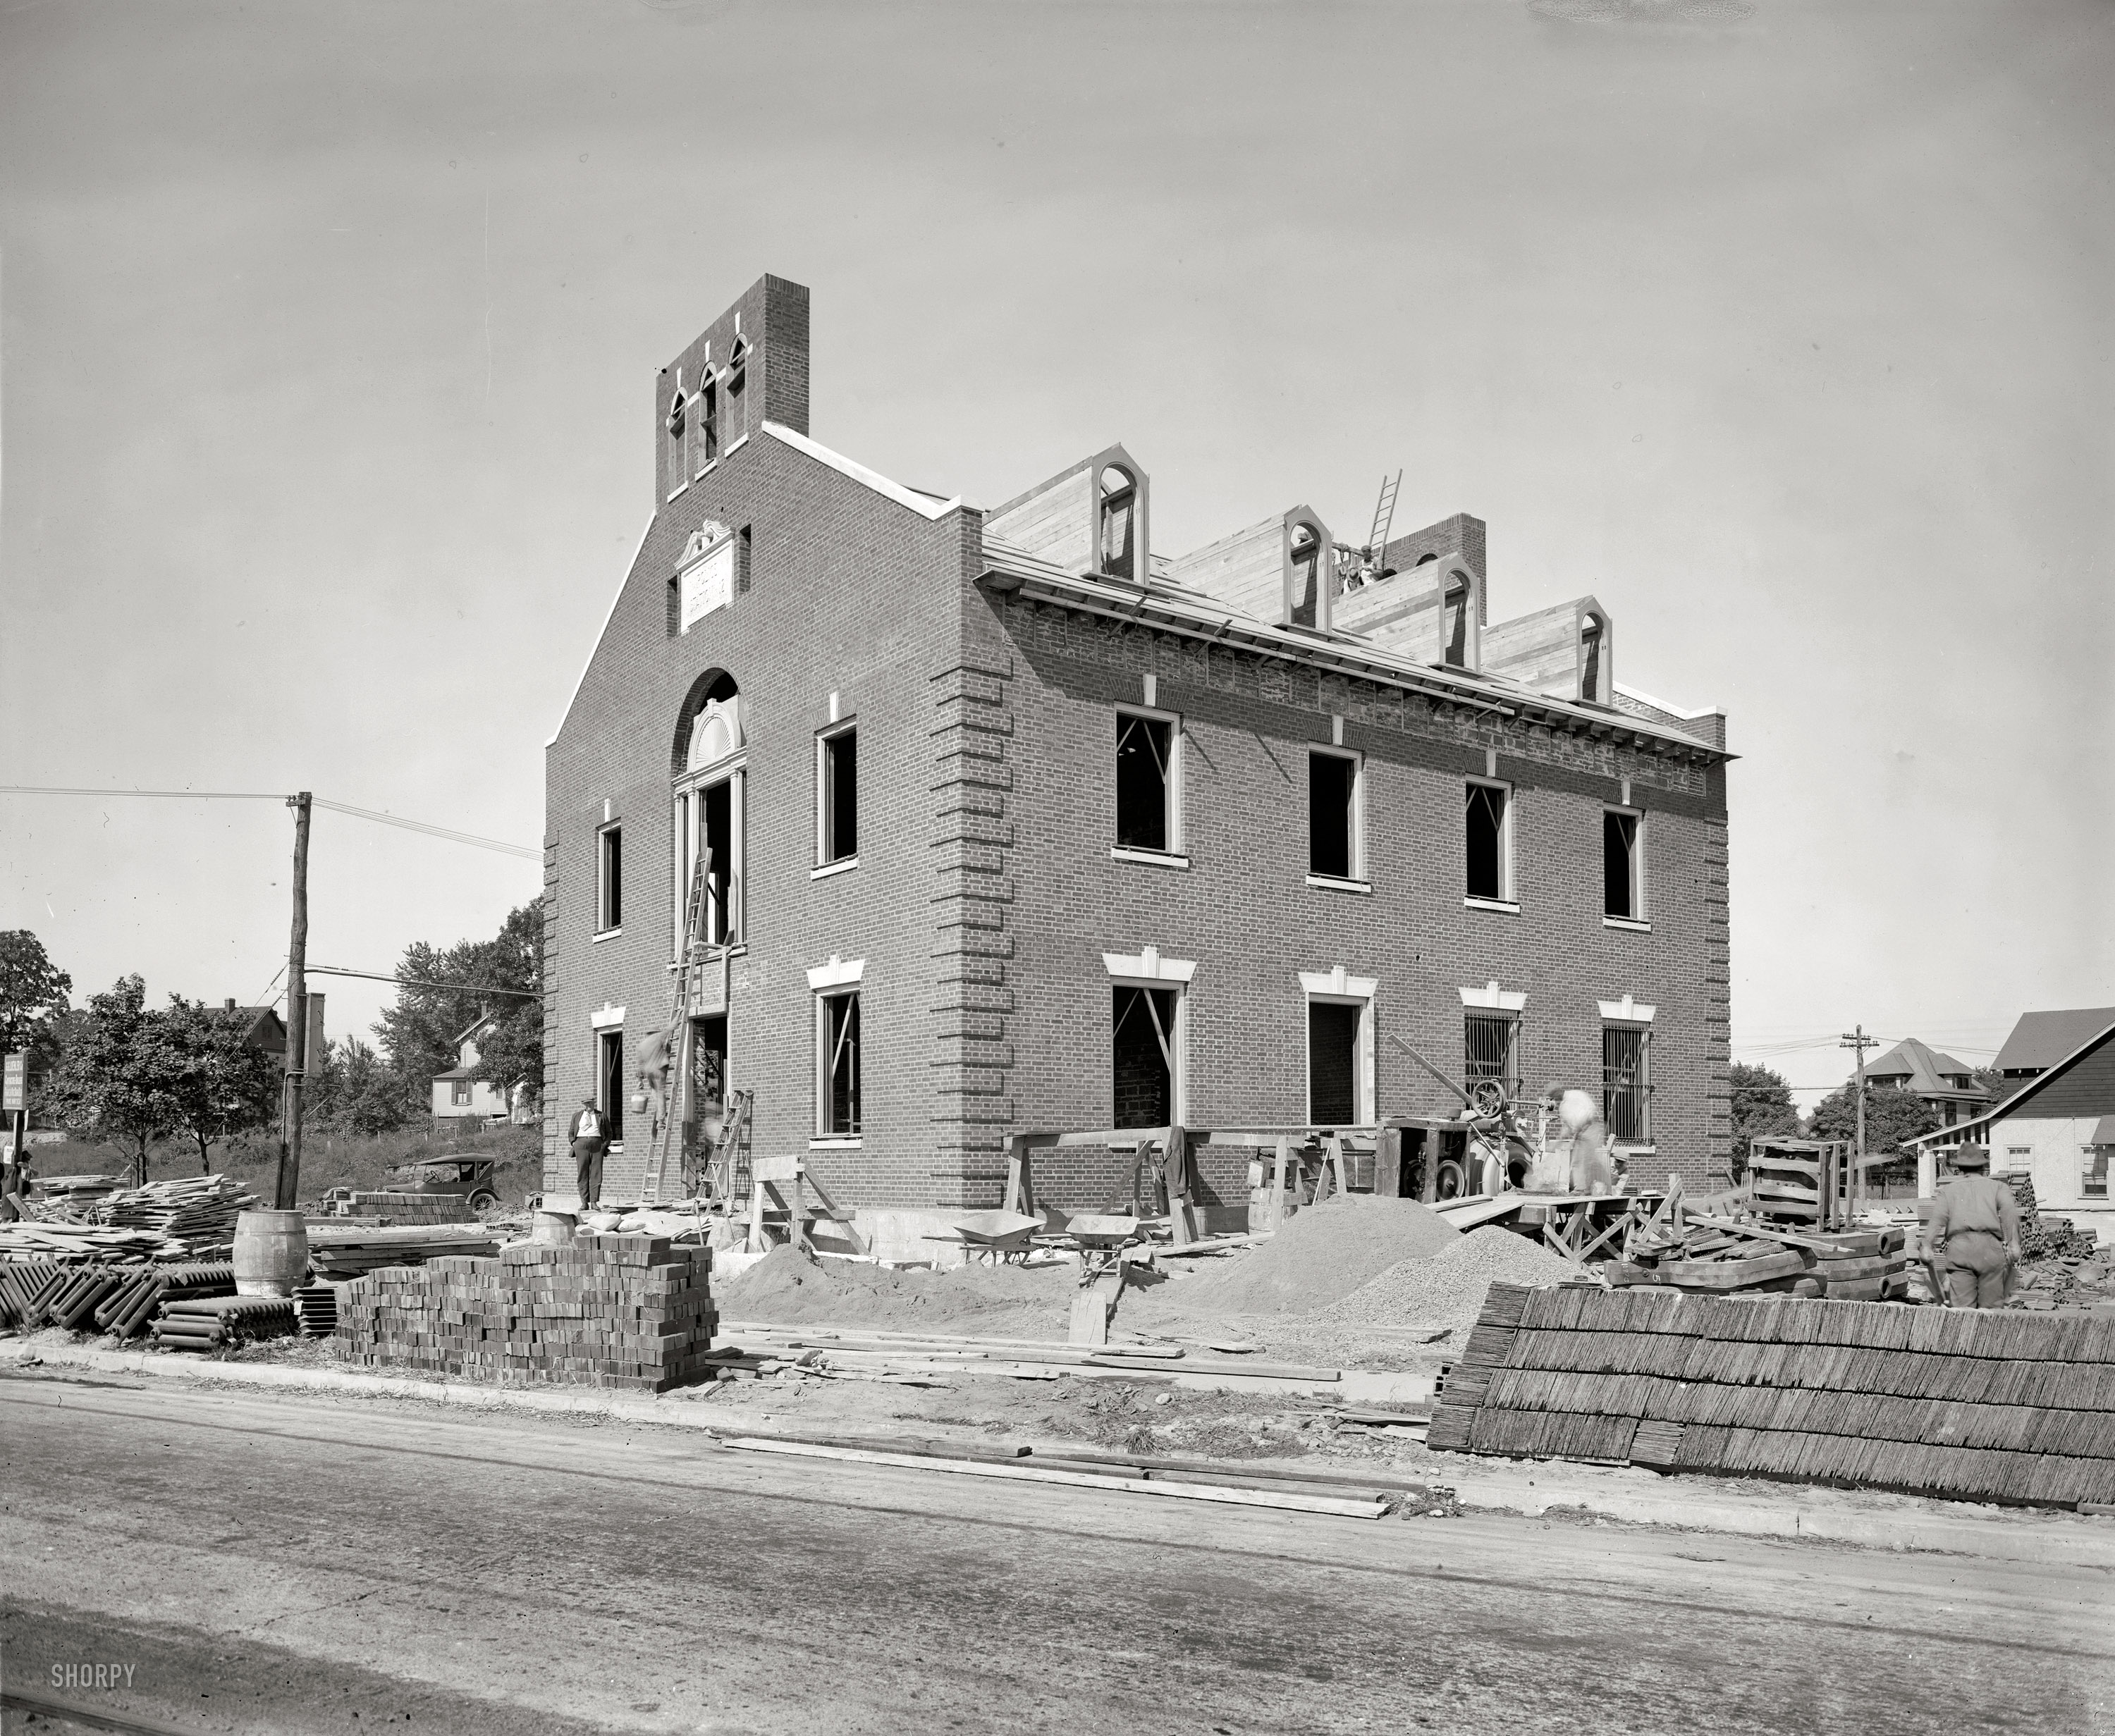 "G.G. Loehler Co., August 1923." The 12th Precinct police station under construction in Washington at 17th Street and Rhode Island Avenue N.E. Cost: $55,376. National Photo Company Collection glass negative. View full size.